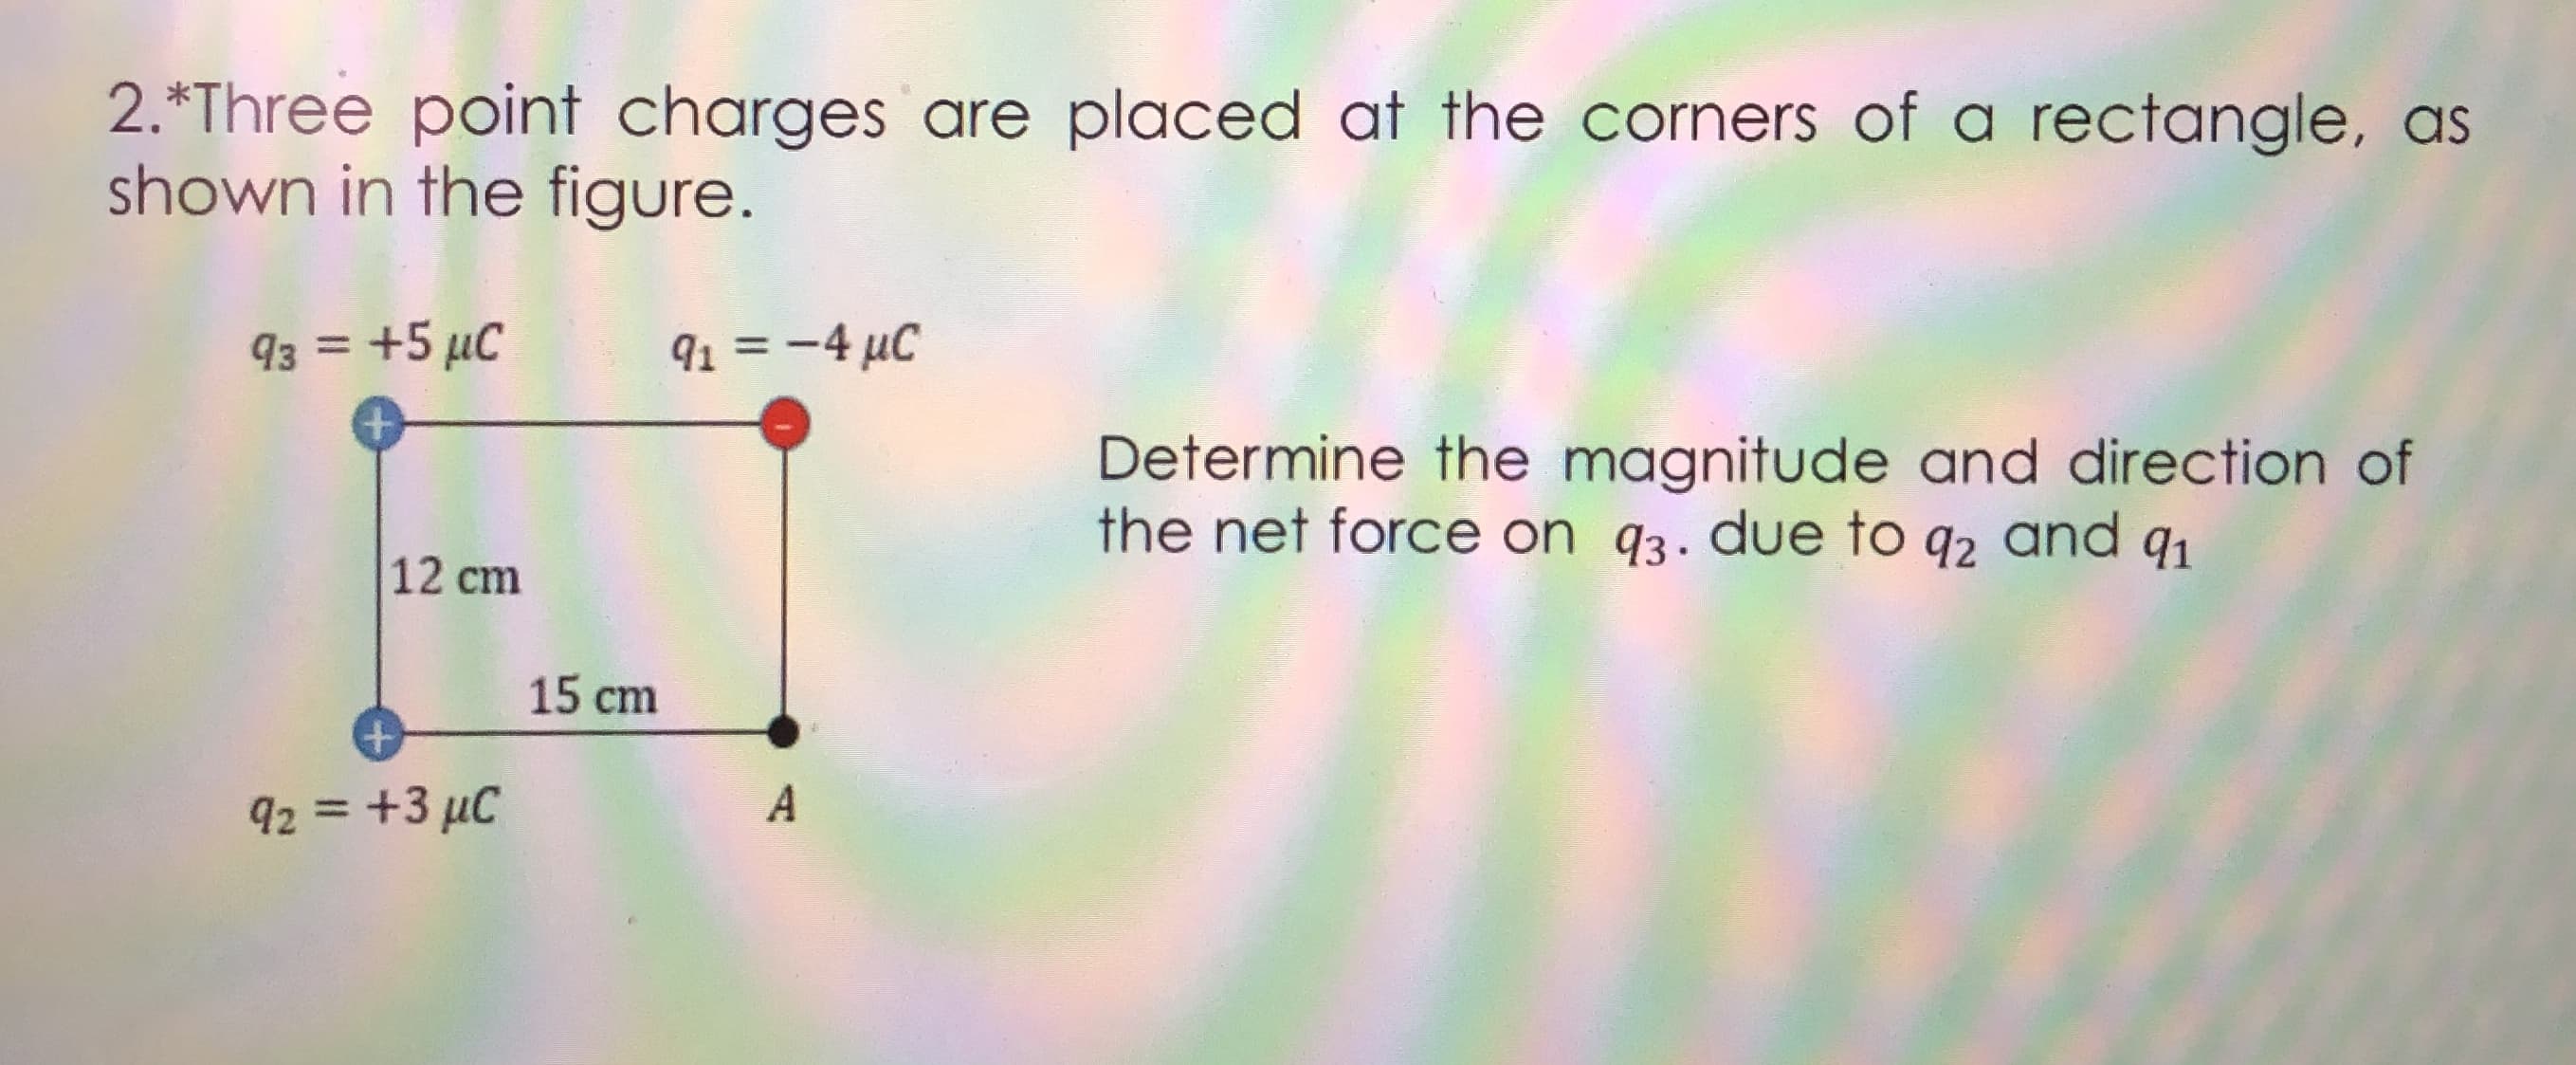 2.*Three point charges are placed at the corners of a rectangle, as
shown in the figure.
93 = +5 µC
91 = -4 µC
%3D
Determine the magnitude and direction of
the net force on q3. due to q2 and q1
12 cm
15 cm
92 = +3 µC
A
%3D
